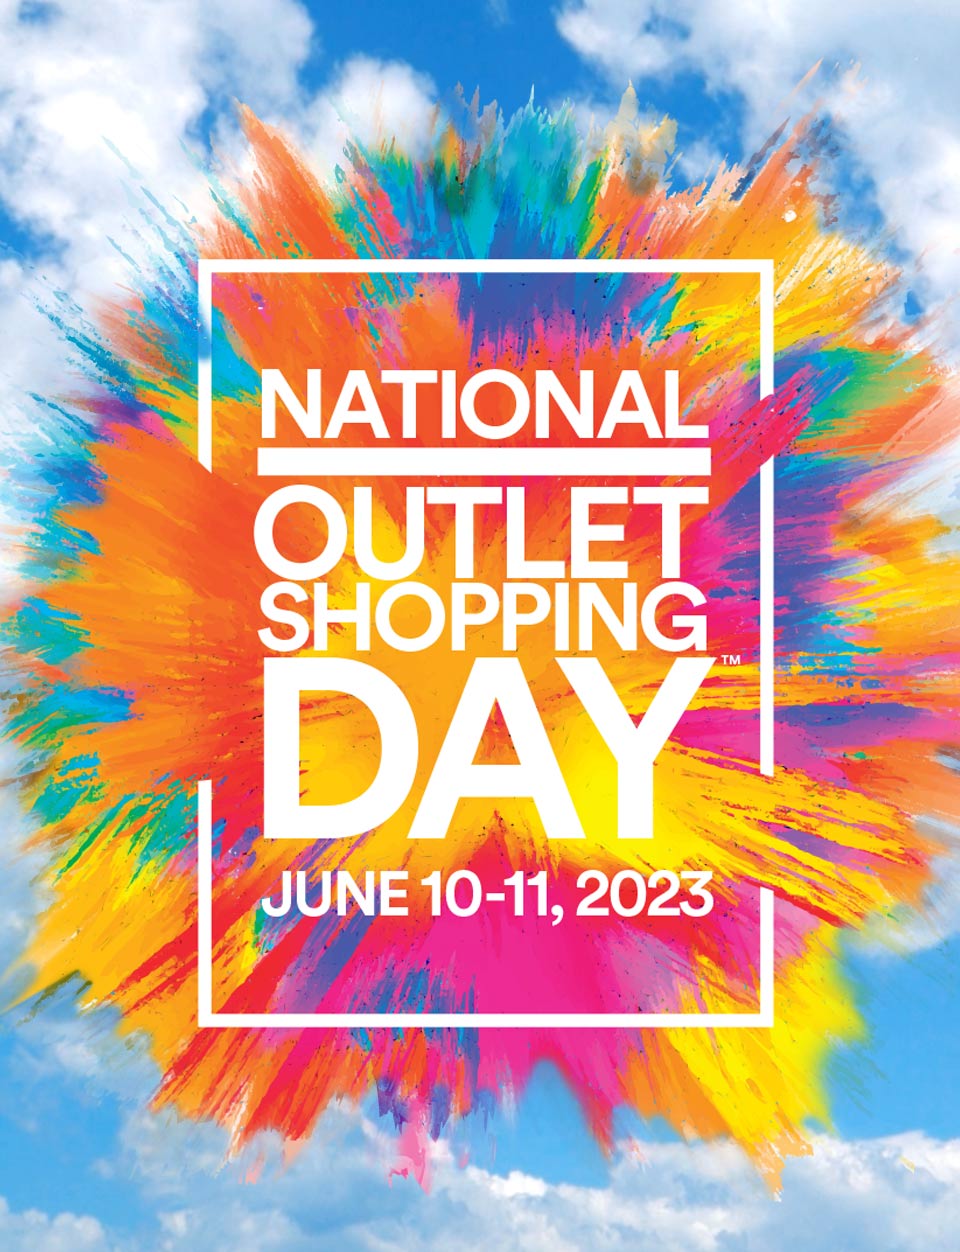 What is National Outlet Shopping Day - 2023